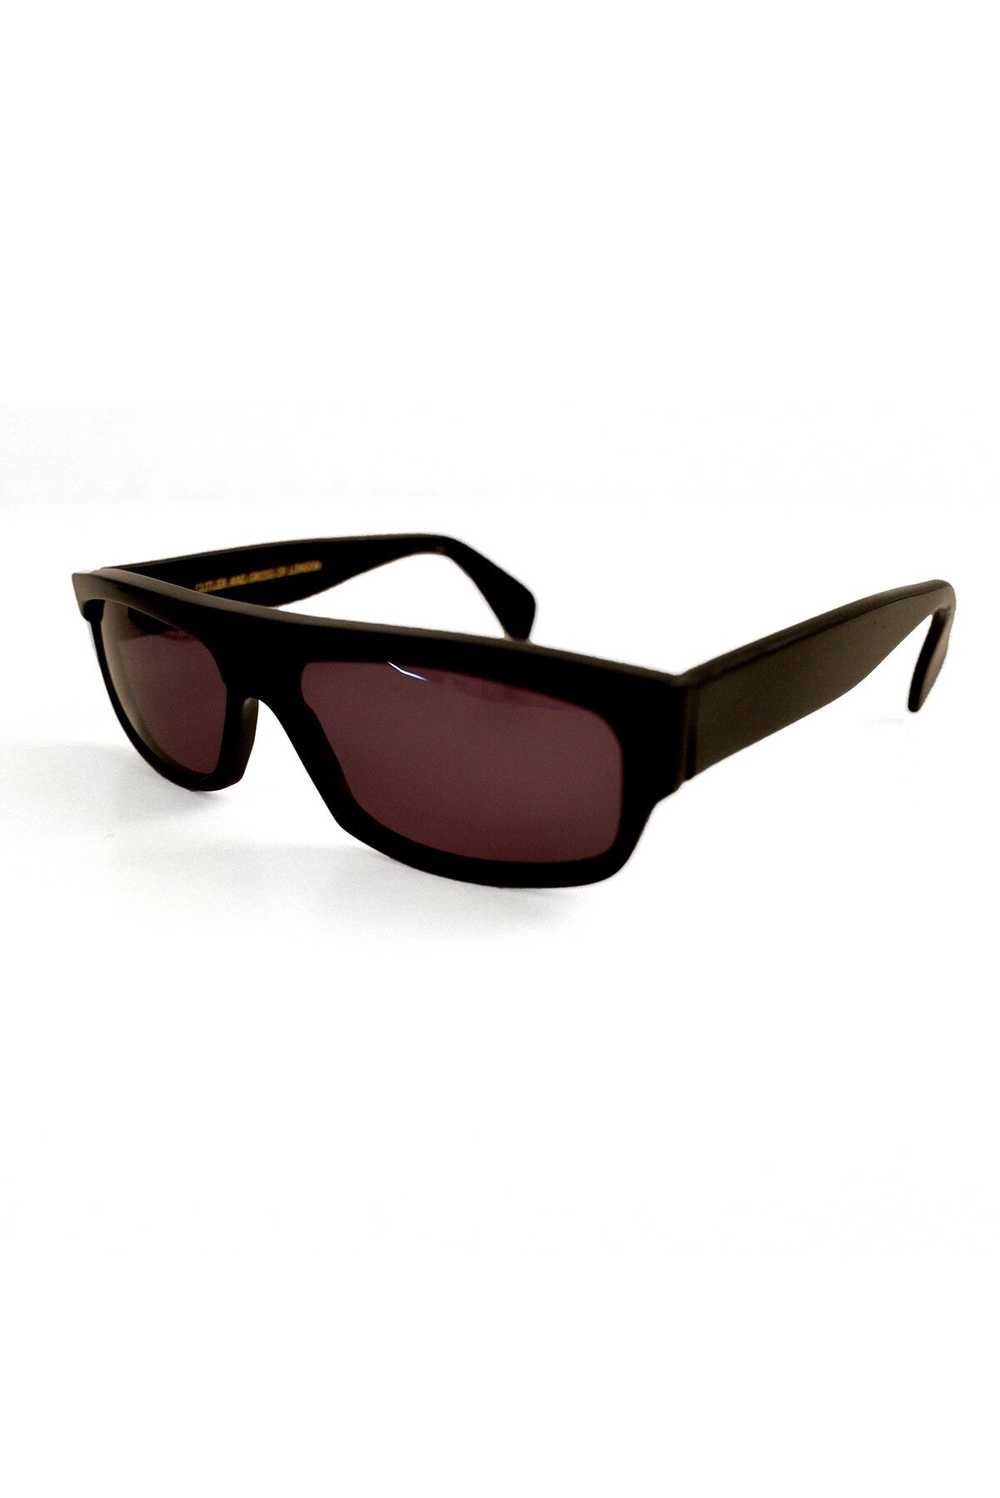 Cutler And Gross Vintage 80's / 90's Sunglasses - image 2